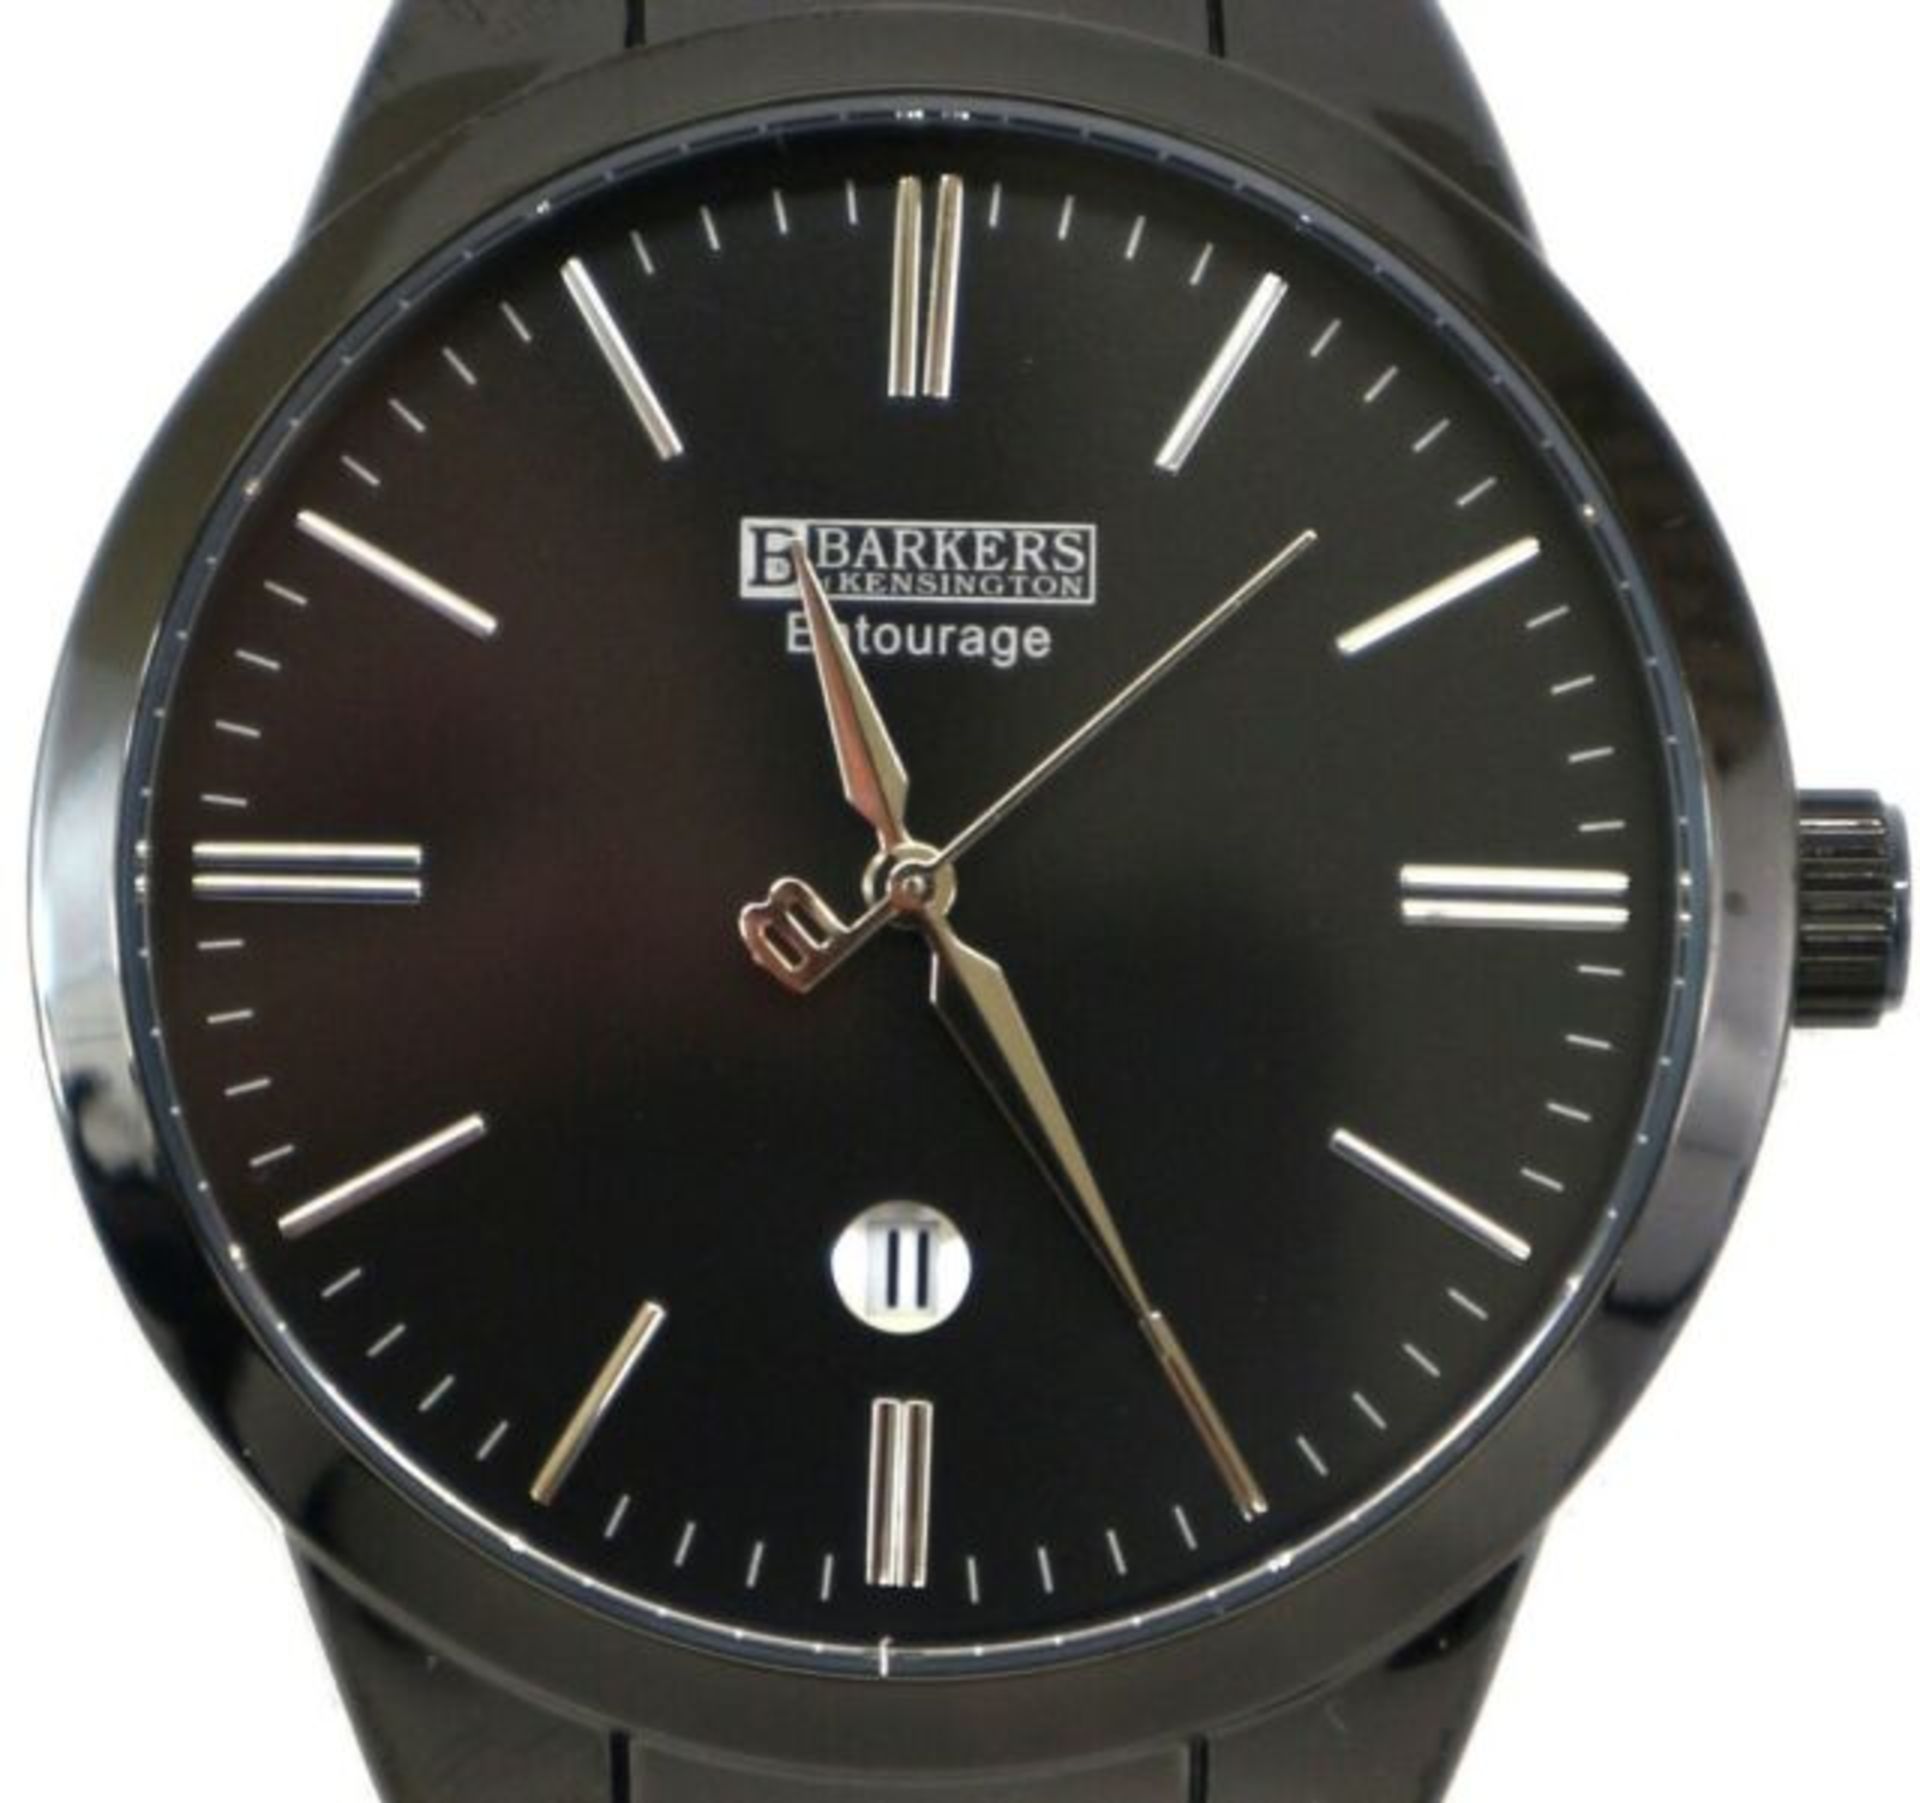 Barkers of Kensington Entourage Black Face with Silver Men's stylish Watch, new and boxed. - Image 4 of 4